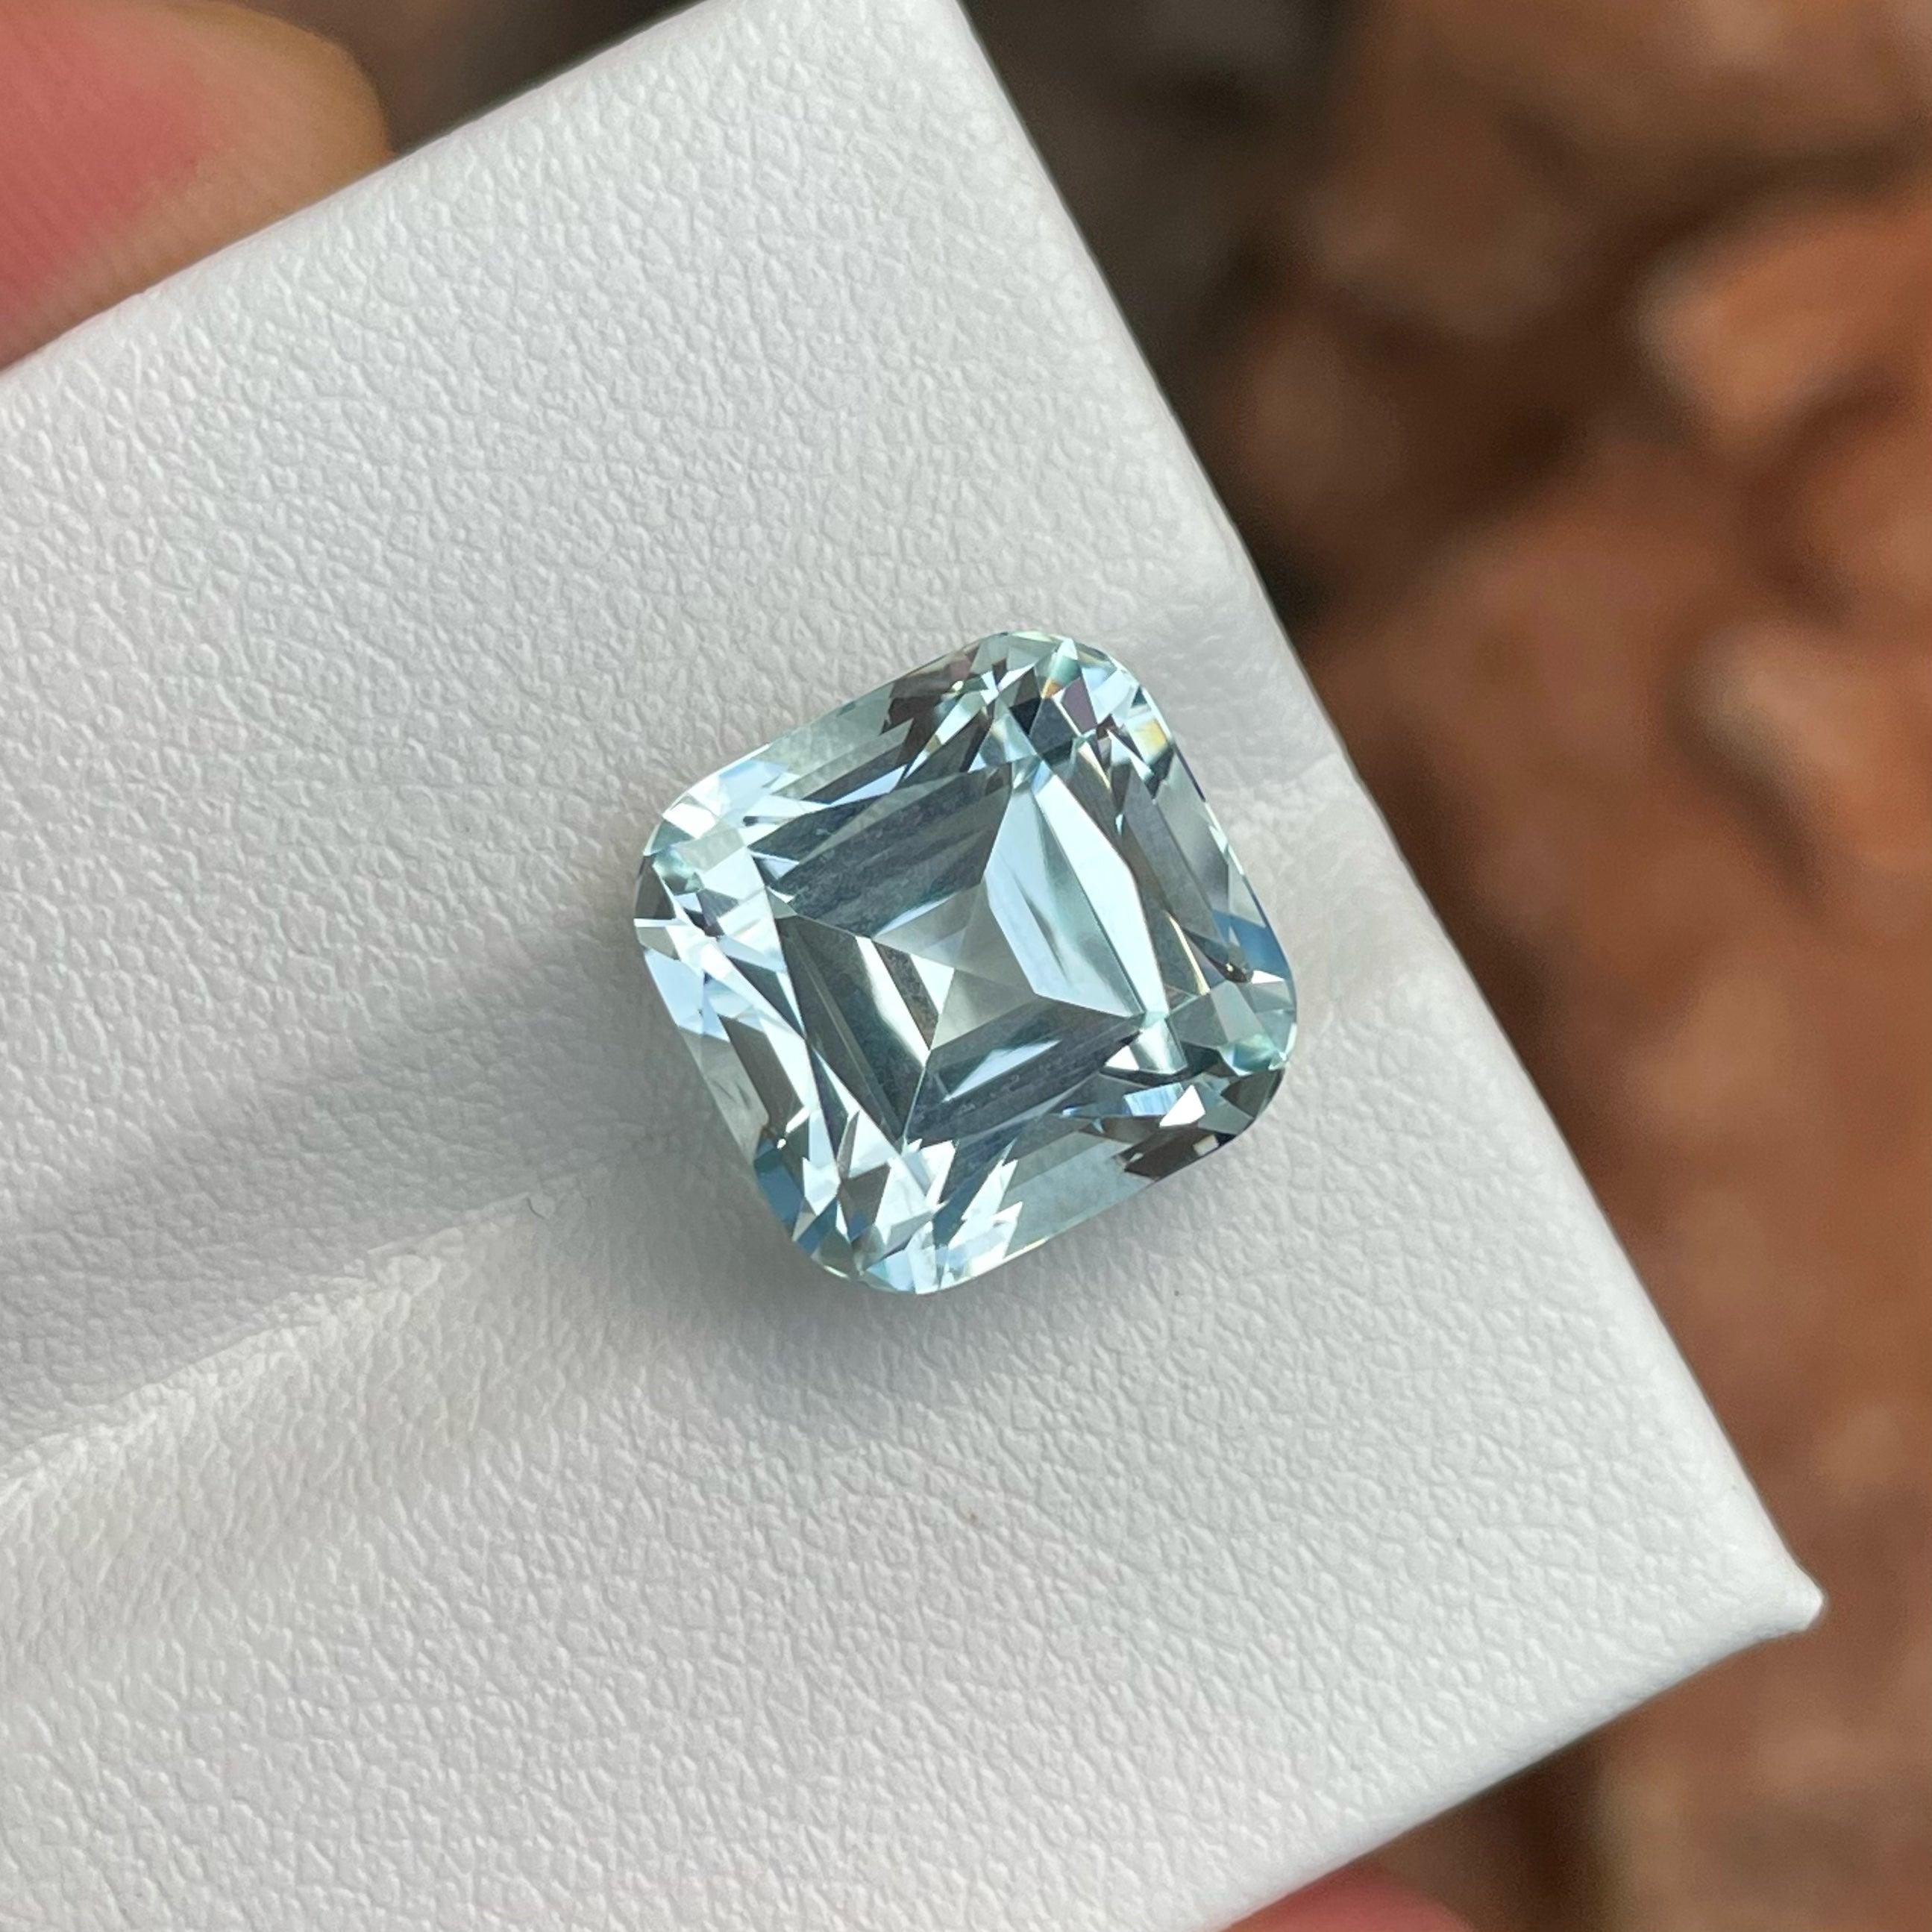 Exquisite Natural Aquamarine Gemstone, available for sale at wholesale price natural high quality 9.50 Carats Vvs Clarity Loose Aquamarine from Pakistan.

Product Information:
GEMSTONE NAME:	Exquisite Natural Aquamarine Gemstone
WEIGHT:	9.50